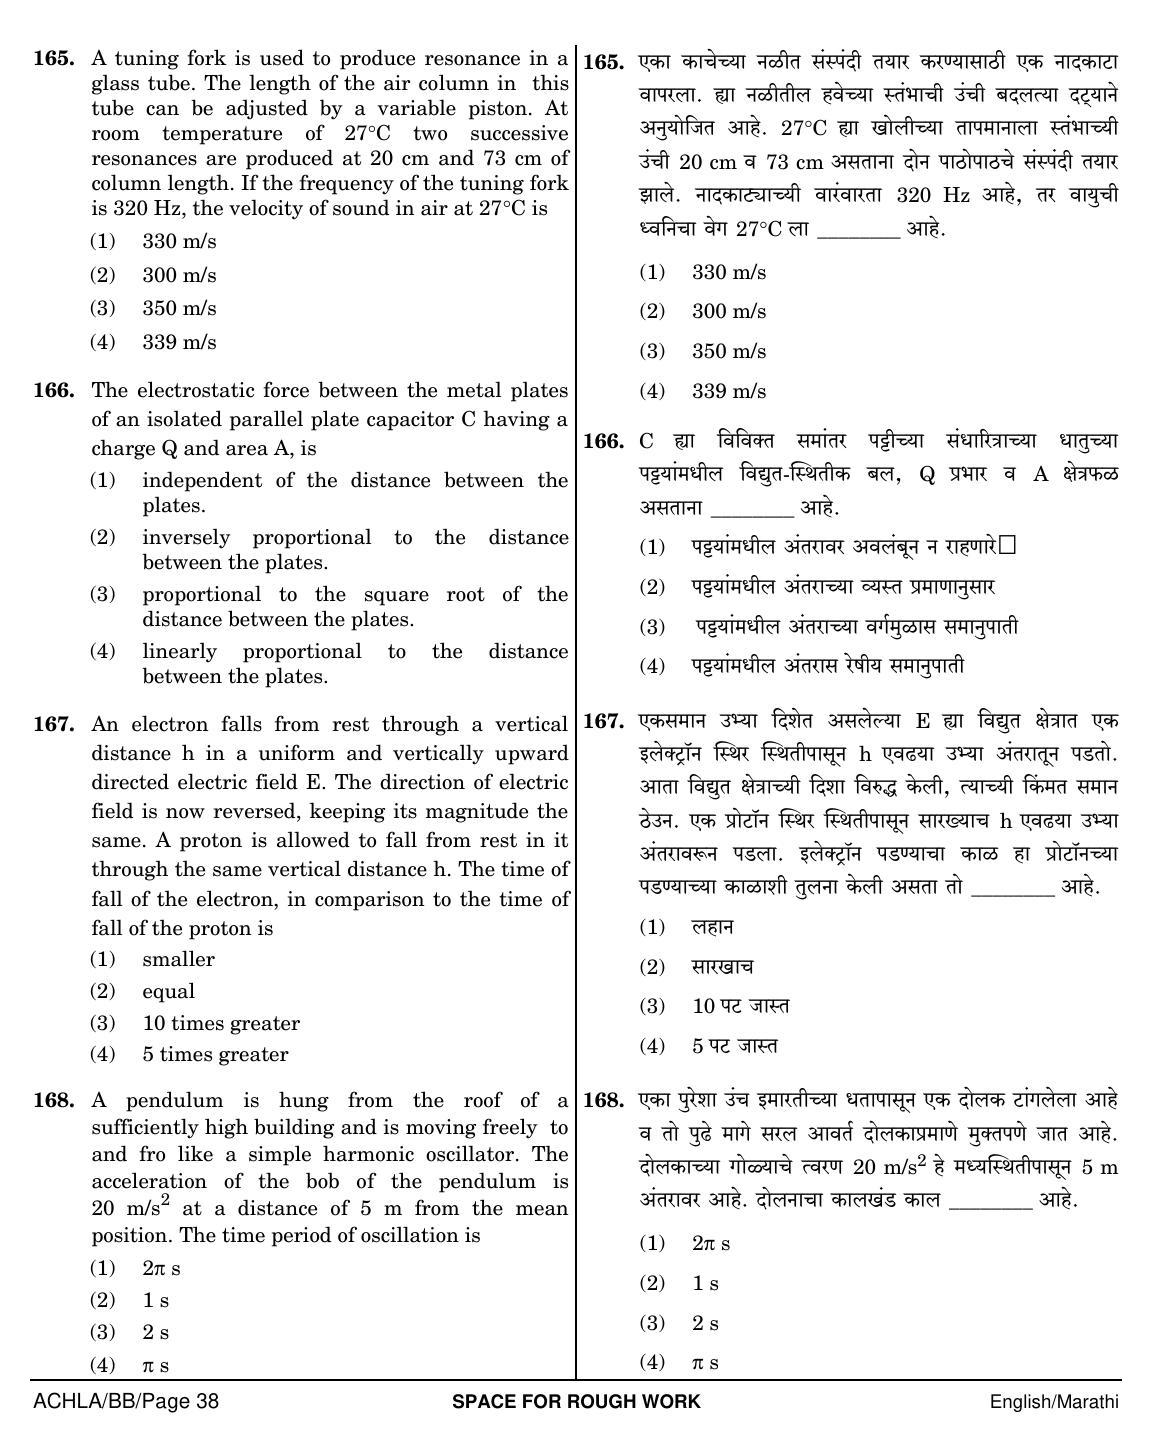 NEET Marathi BB 2018 Question Paper - Page 38